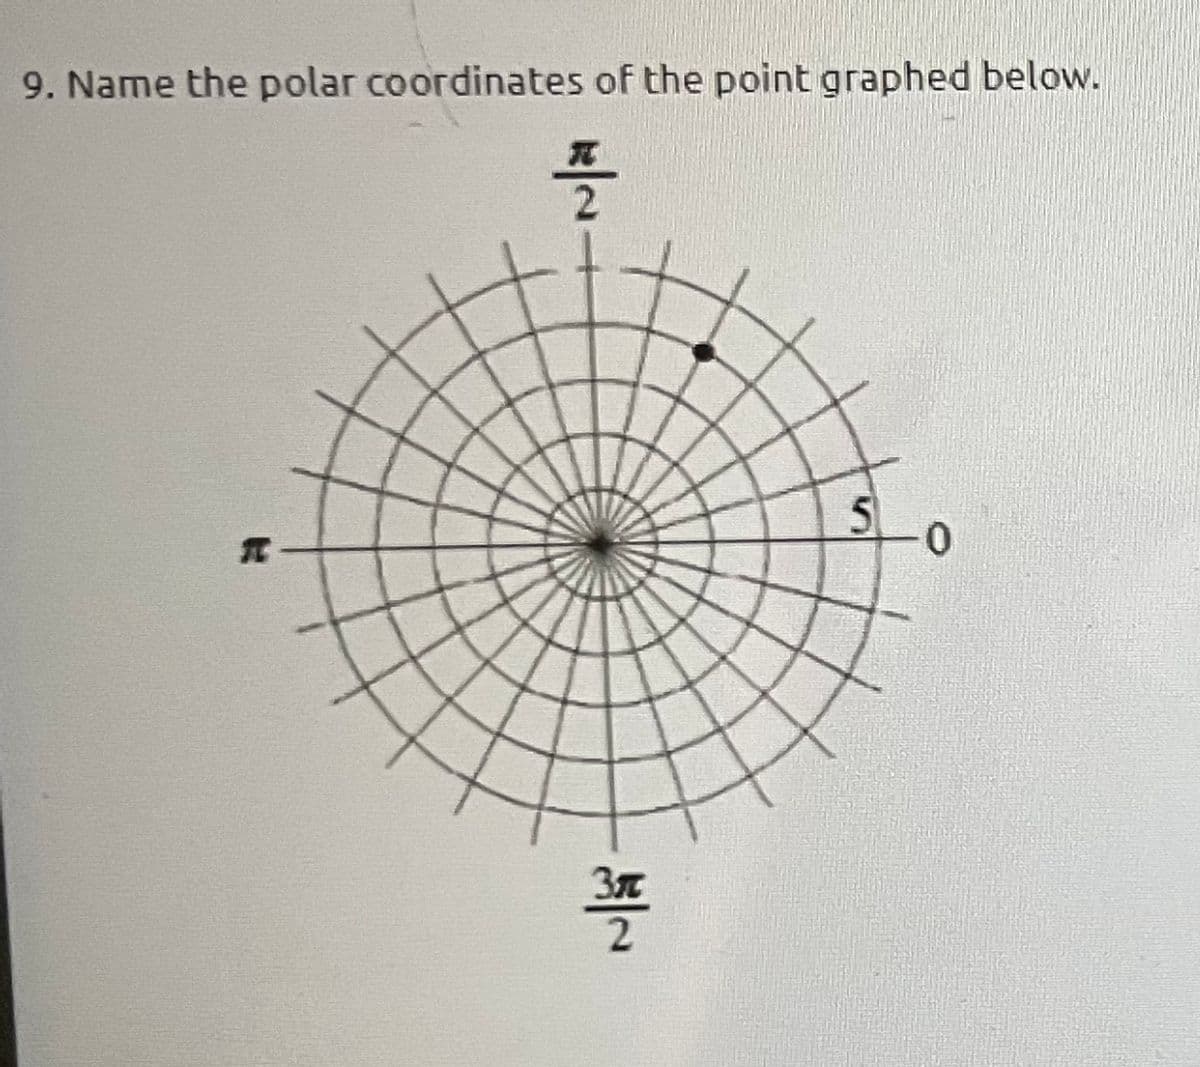 9. Name the polar coordinates of the point graphed below.
플
S 0
쫄